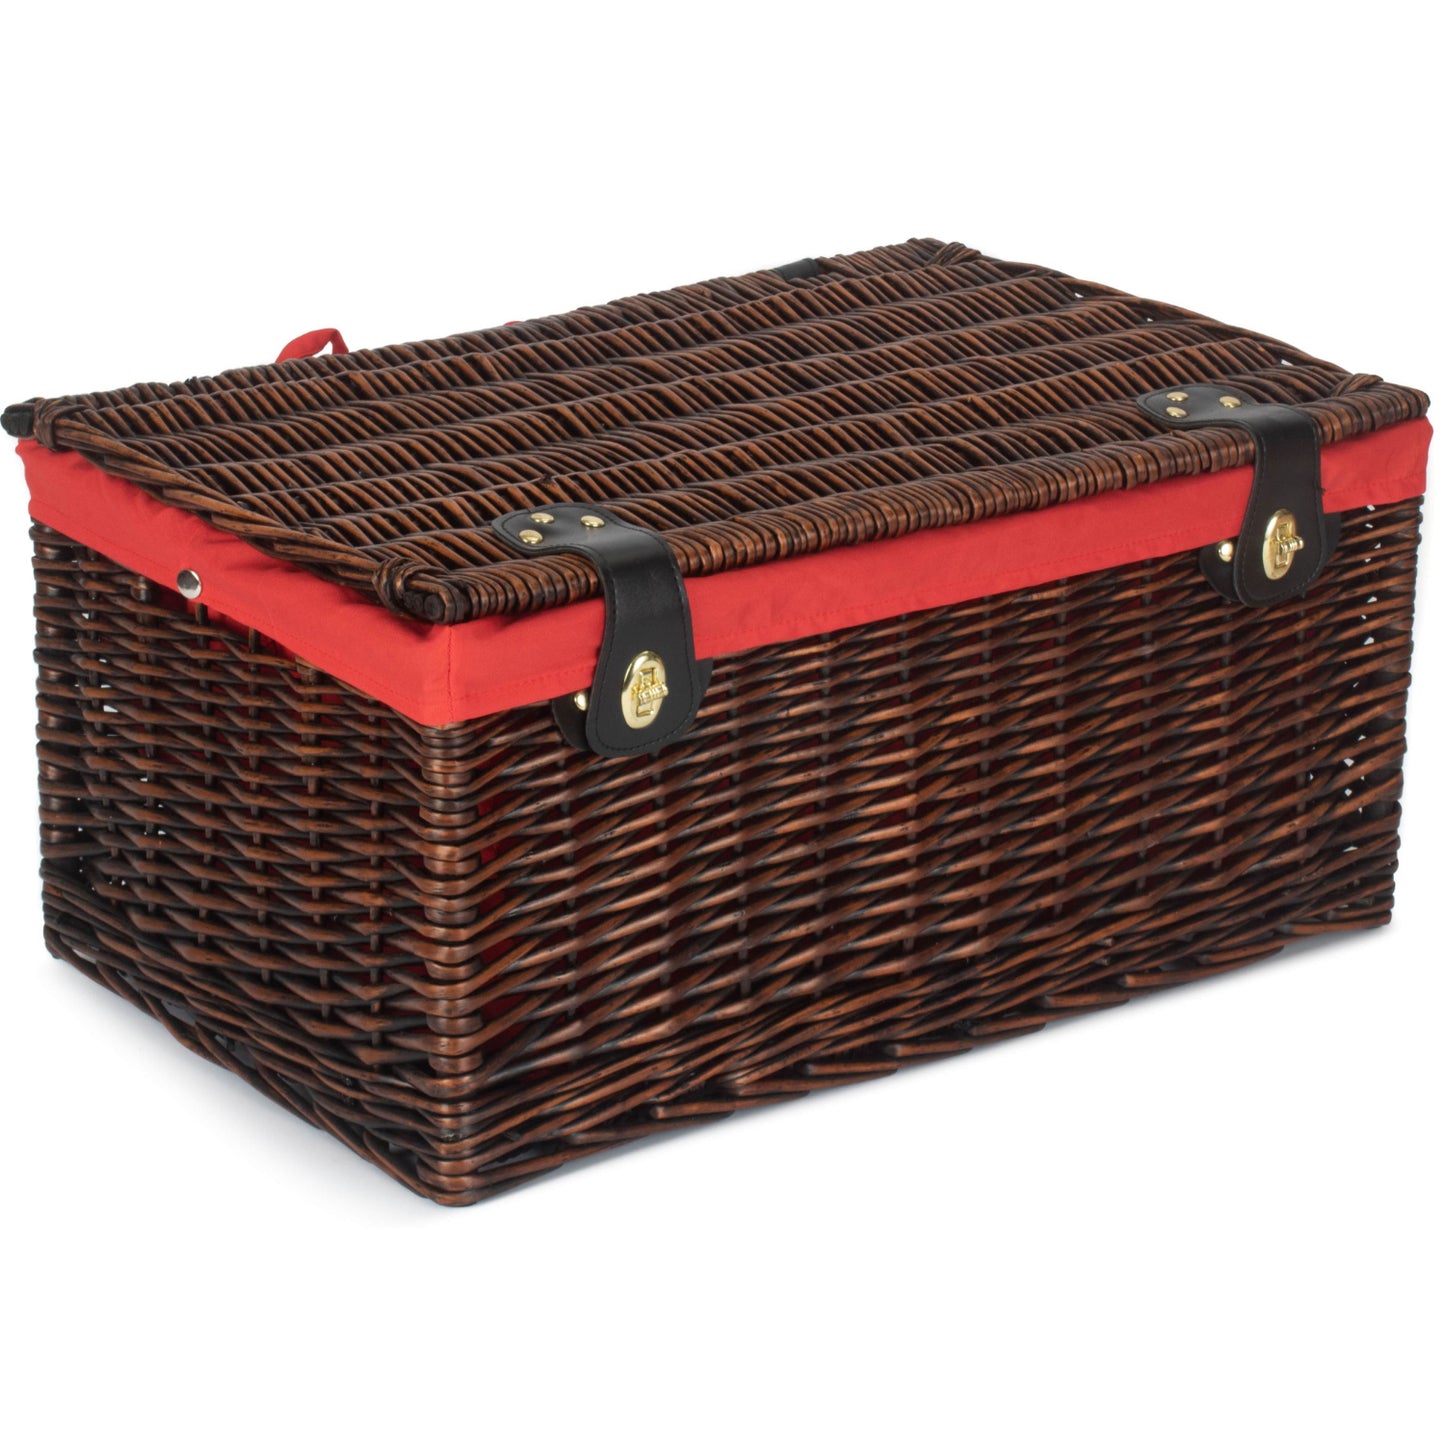 20 Inch Chocolate Brown Hamper With Red Lining